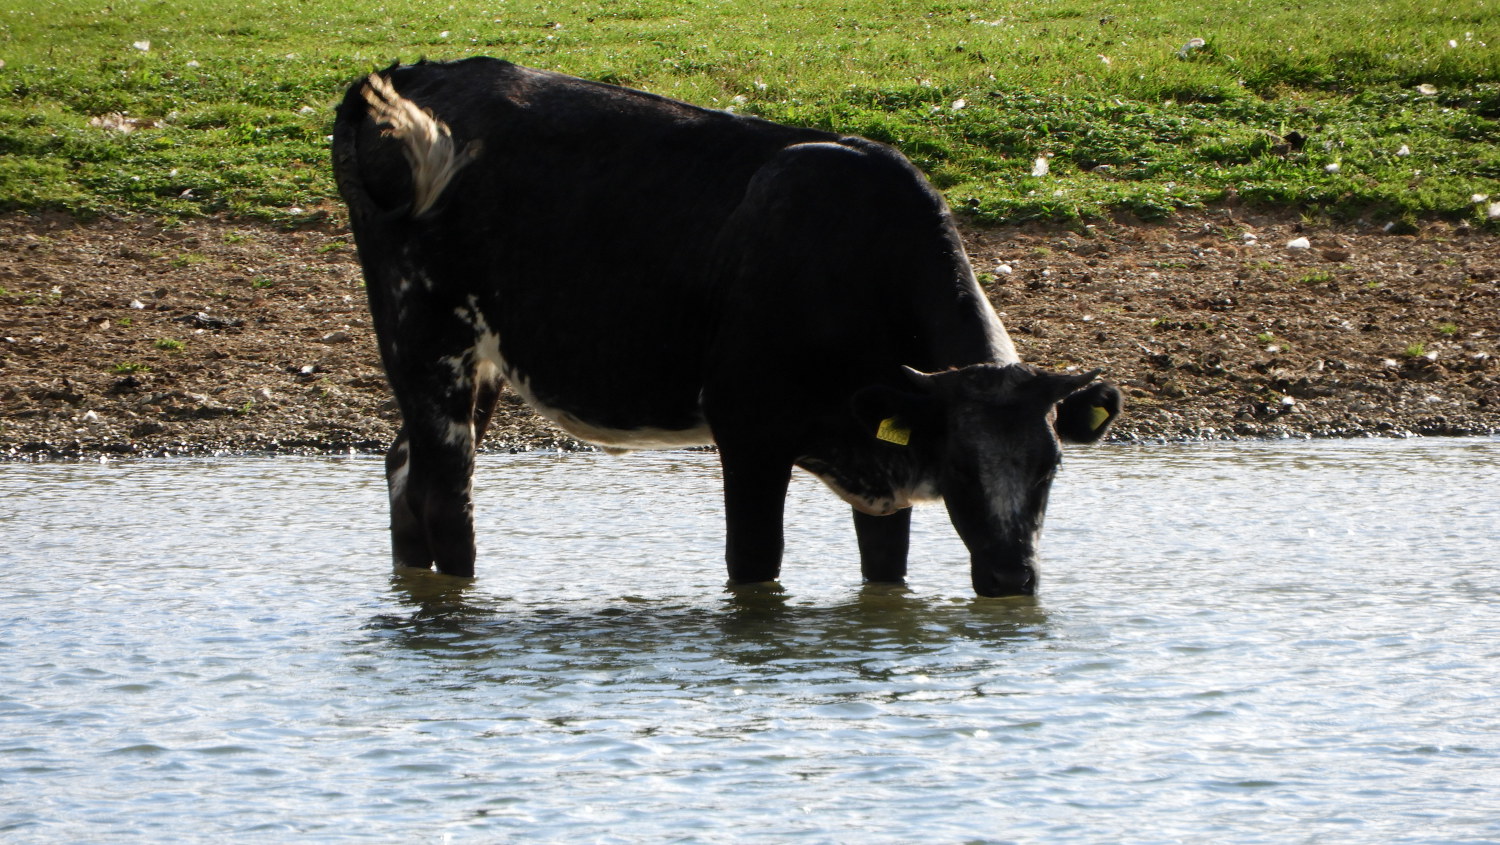 Cow enjoying a drink in the Thames